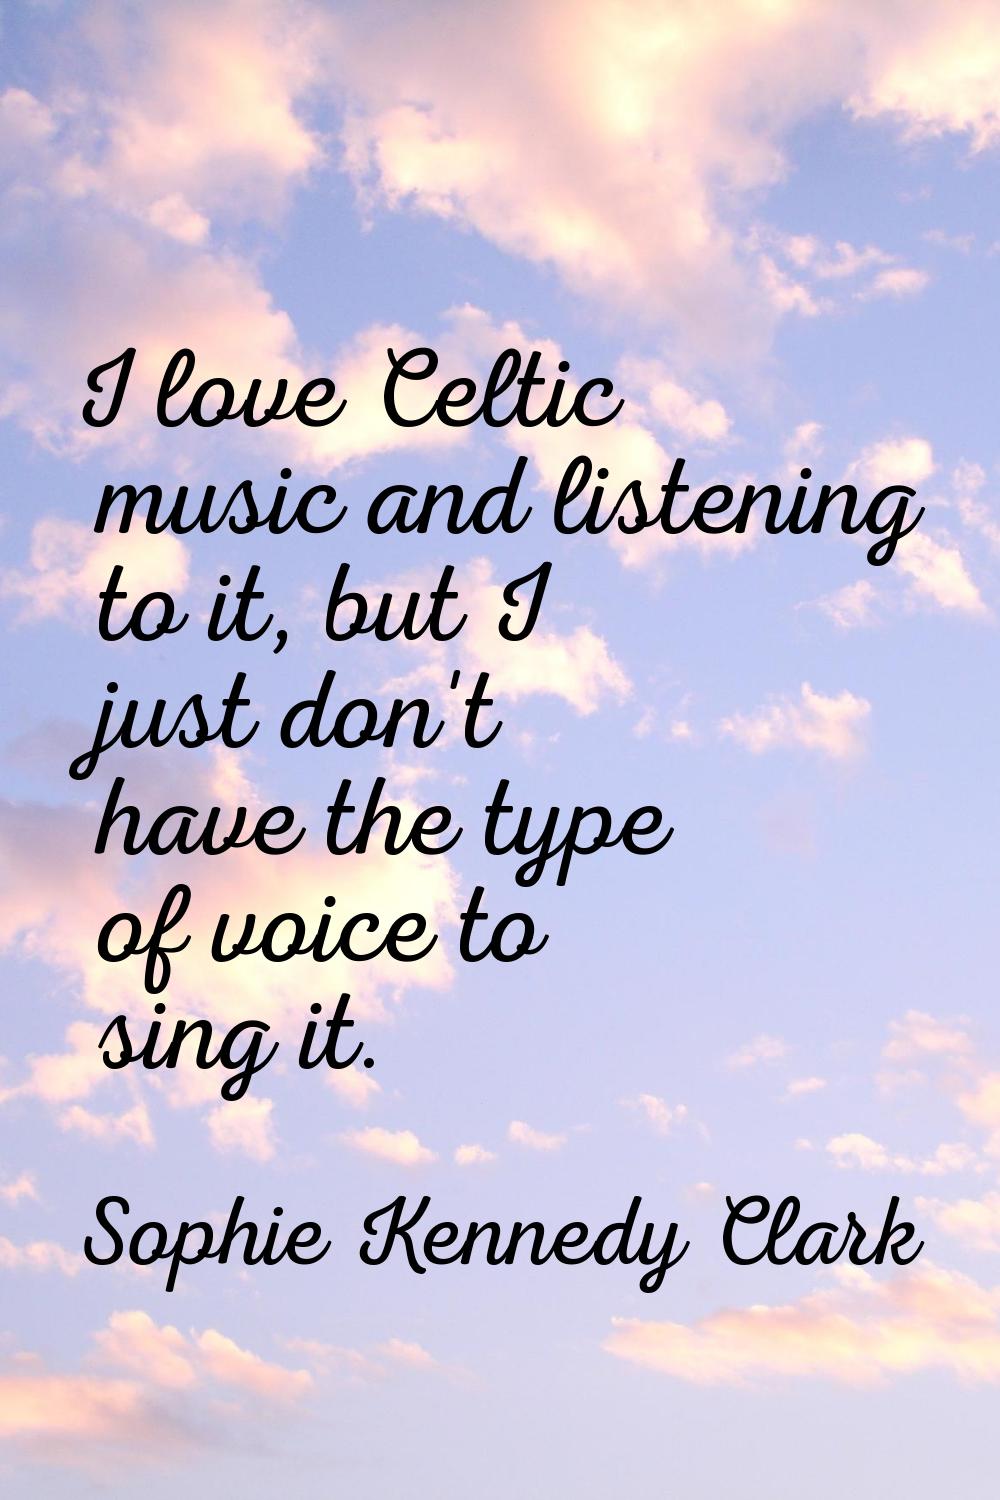 I love Celtic music and listening to it, but I just don't have the type of voice to sing it.